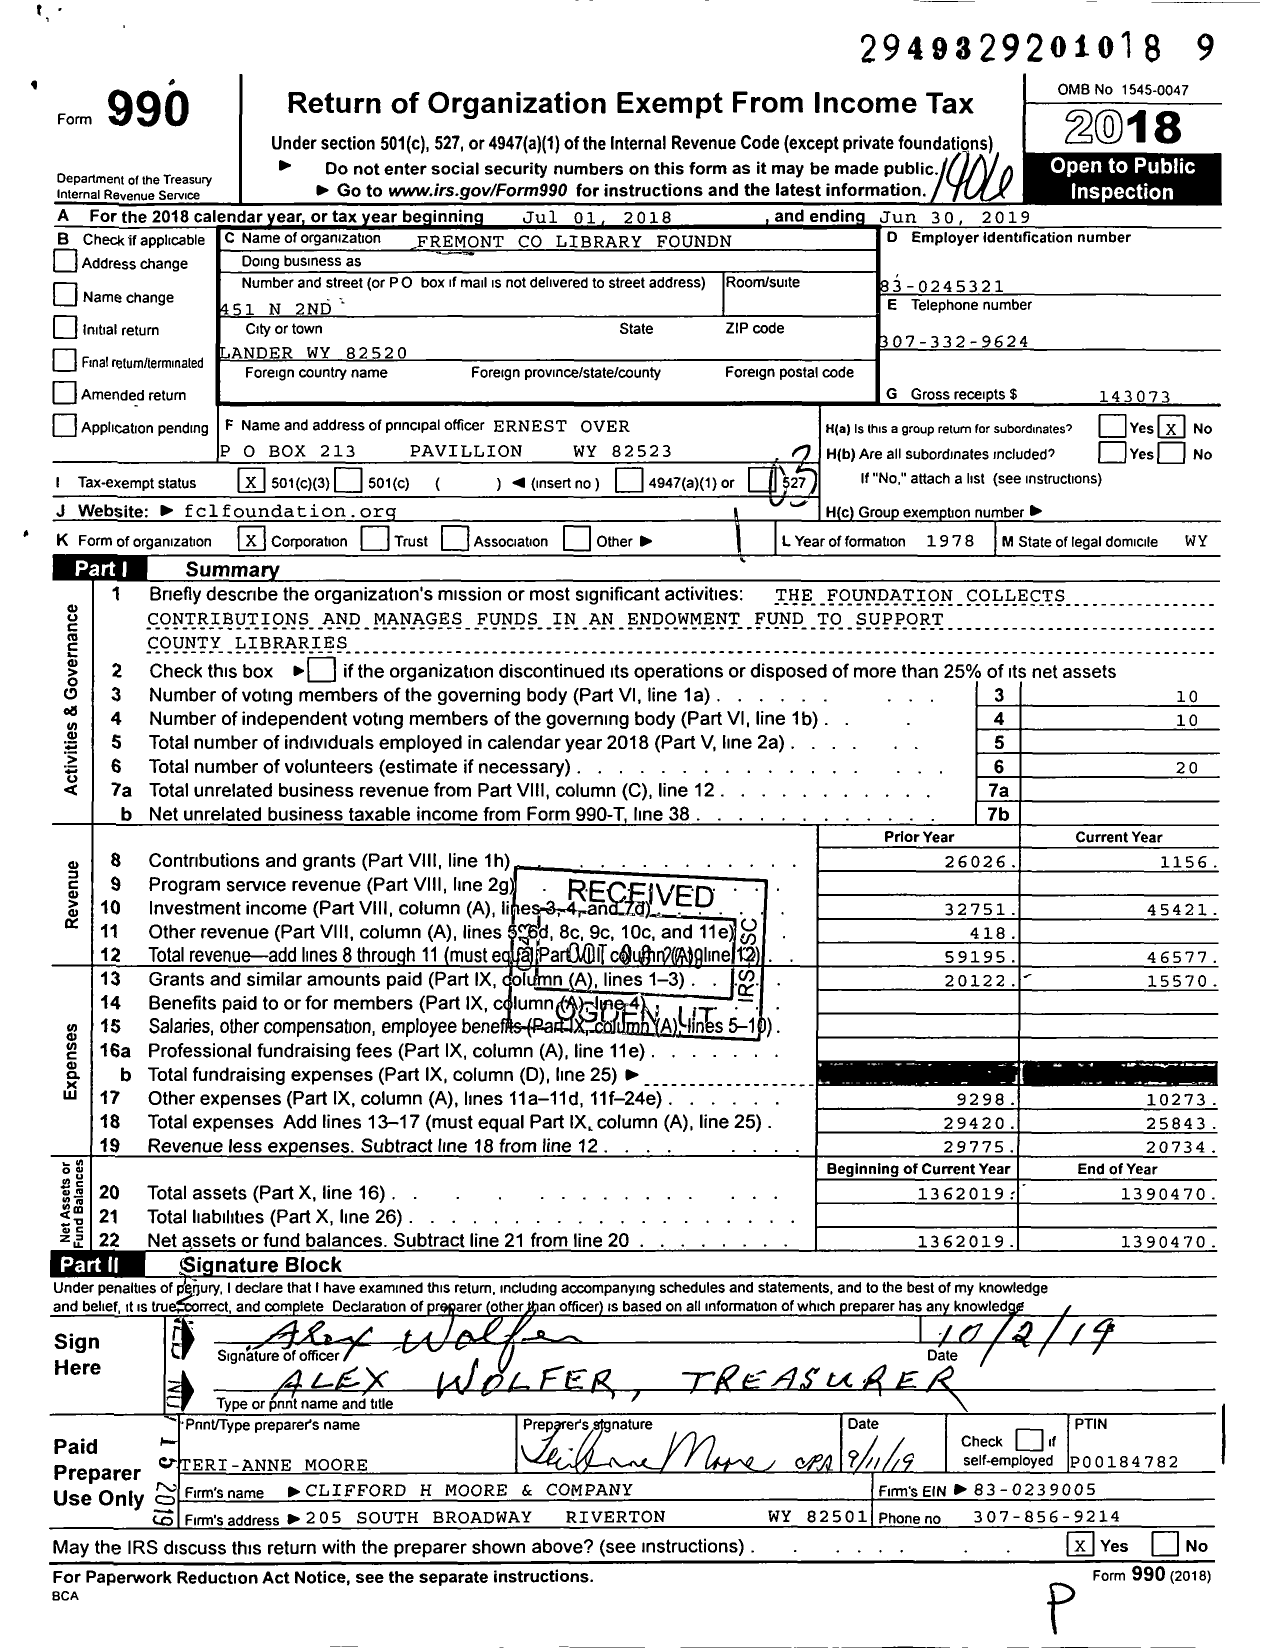 Image of first page of 2018 Form 990 for Fremont Library Foundn